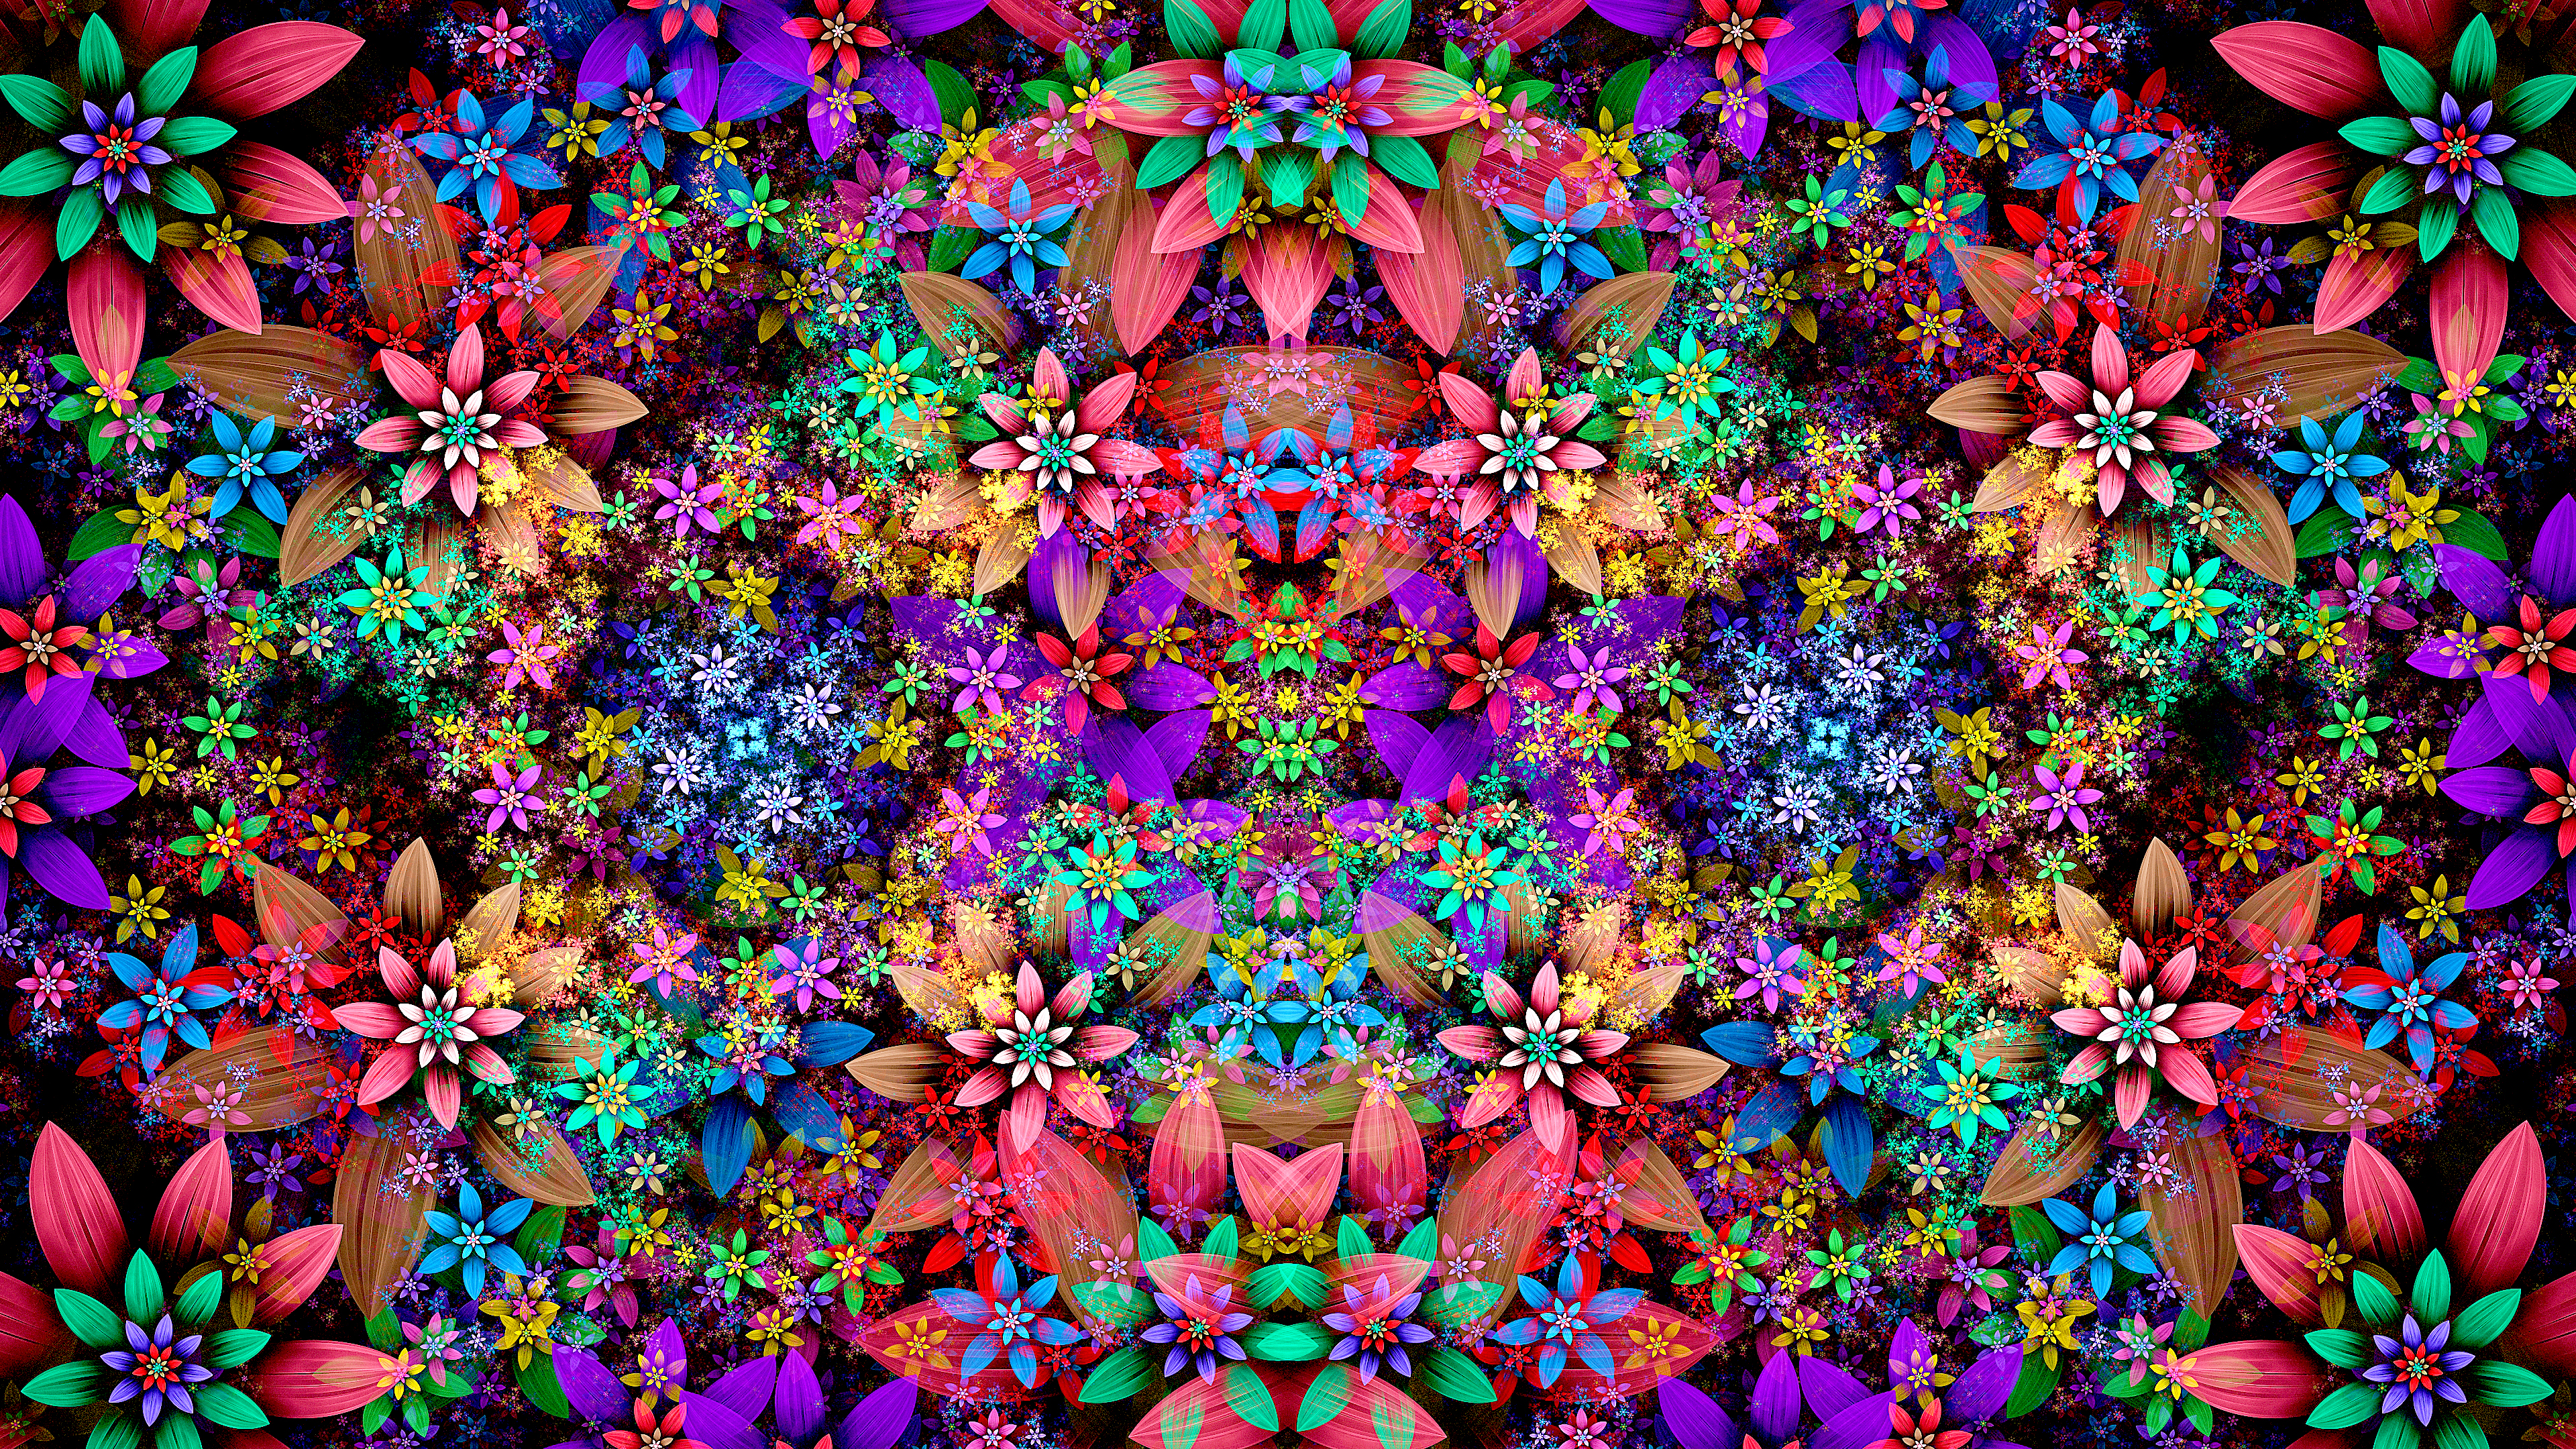 Abstract Flowers Leaves Mirrored Symmetry 3840x2160